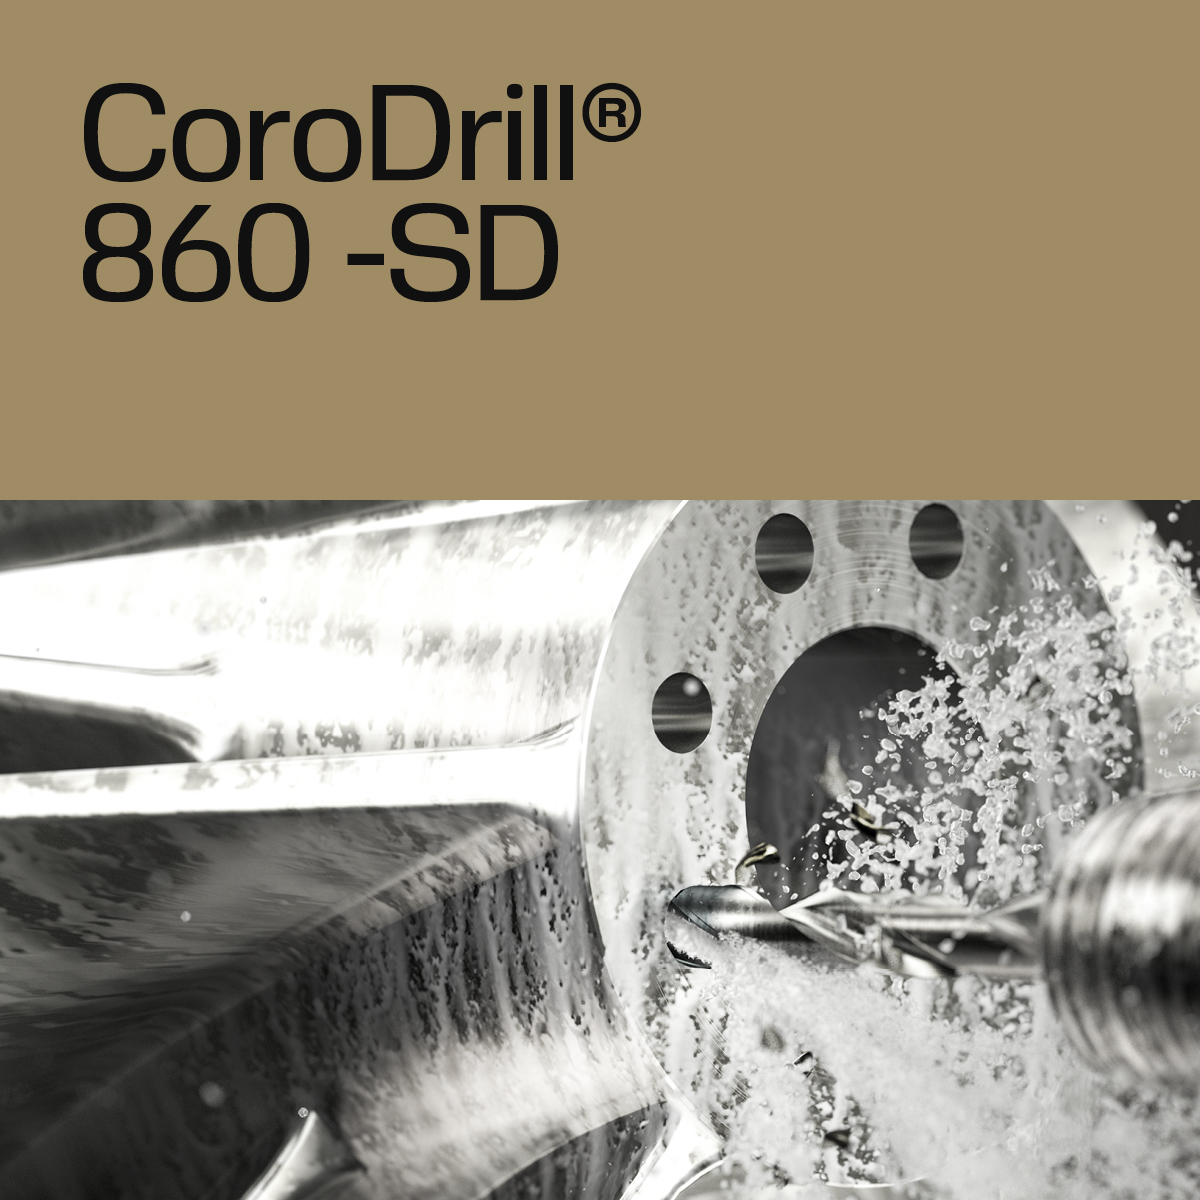 Do you need a drill to trust for your high-value nickel-based HRSA components? Check out CoroDrill® 860 with -SD geometry, a drill that guarantees the highest performance and process security.

go.sandvik/1jK

#SandvikCoromant #ShapingTheFutureTogether #CoroDrill860